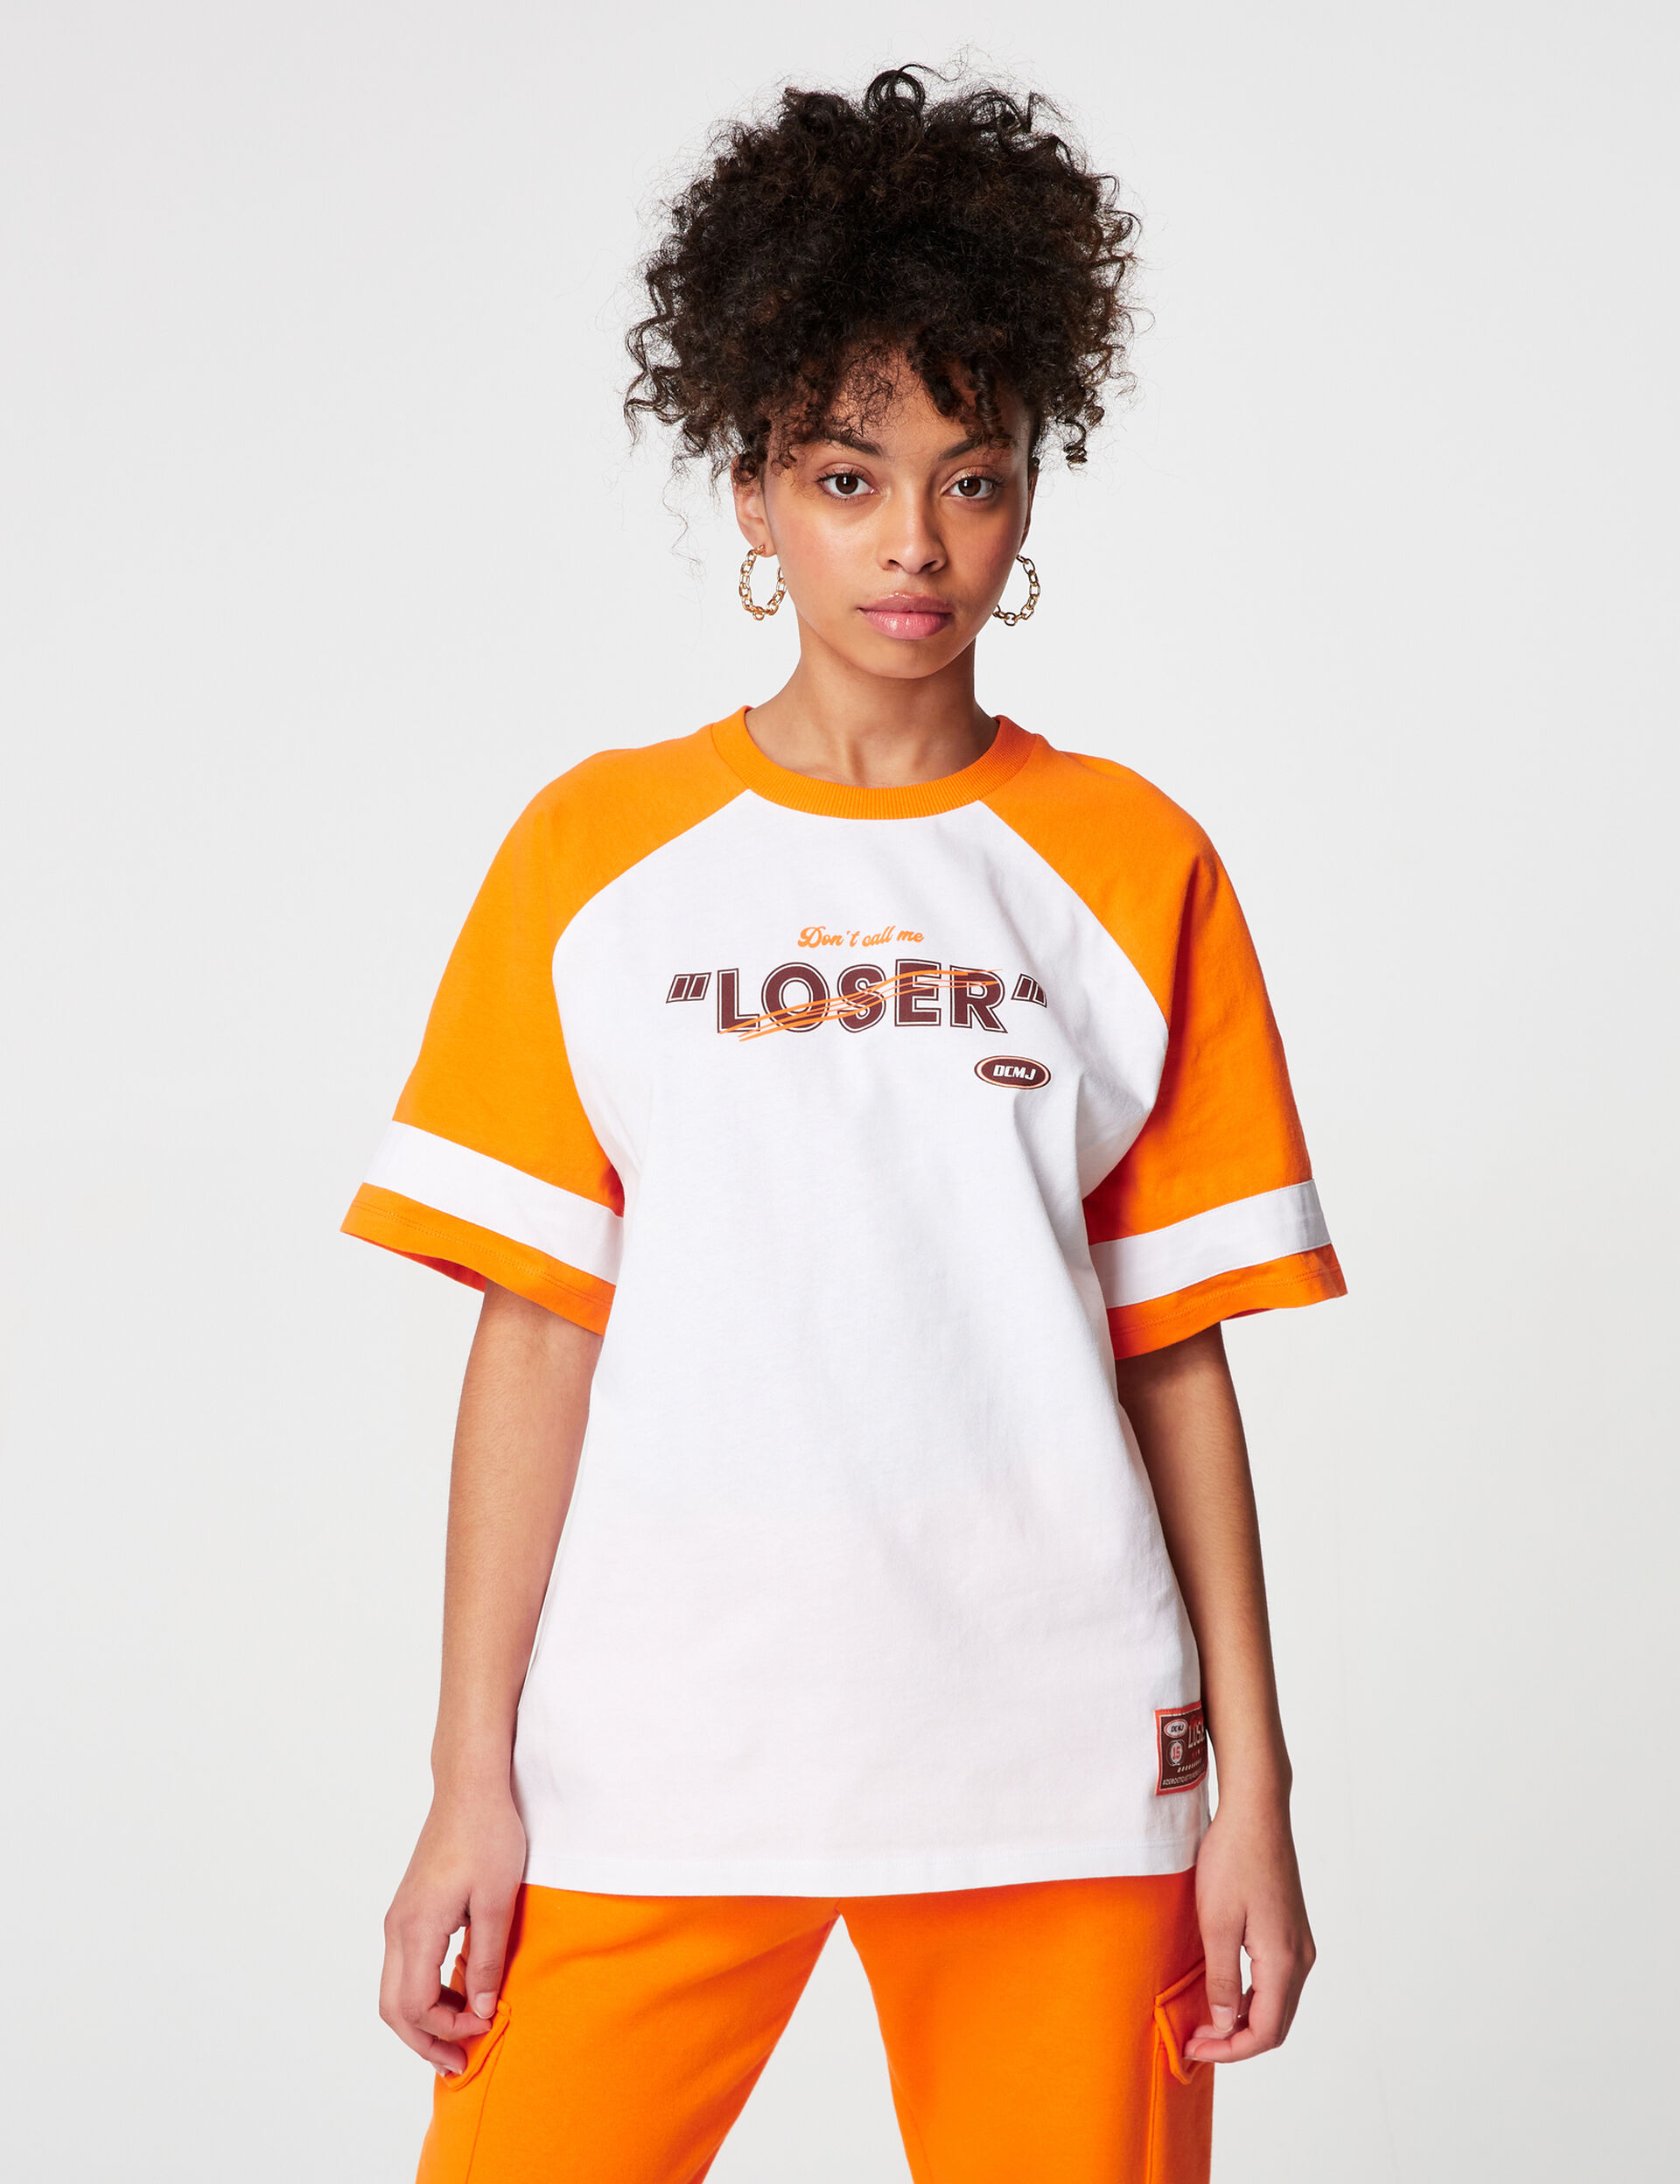 Don't call me loser T-shirt